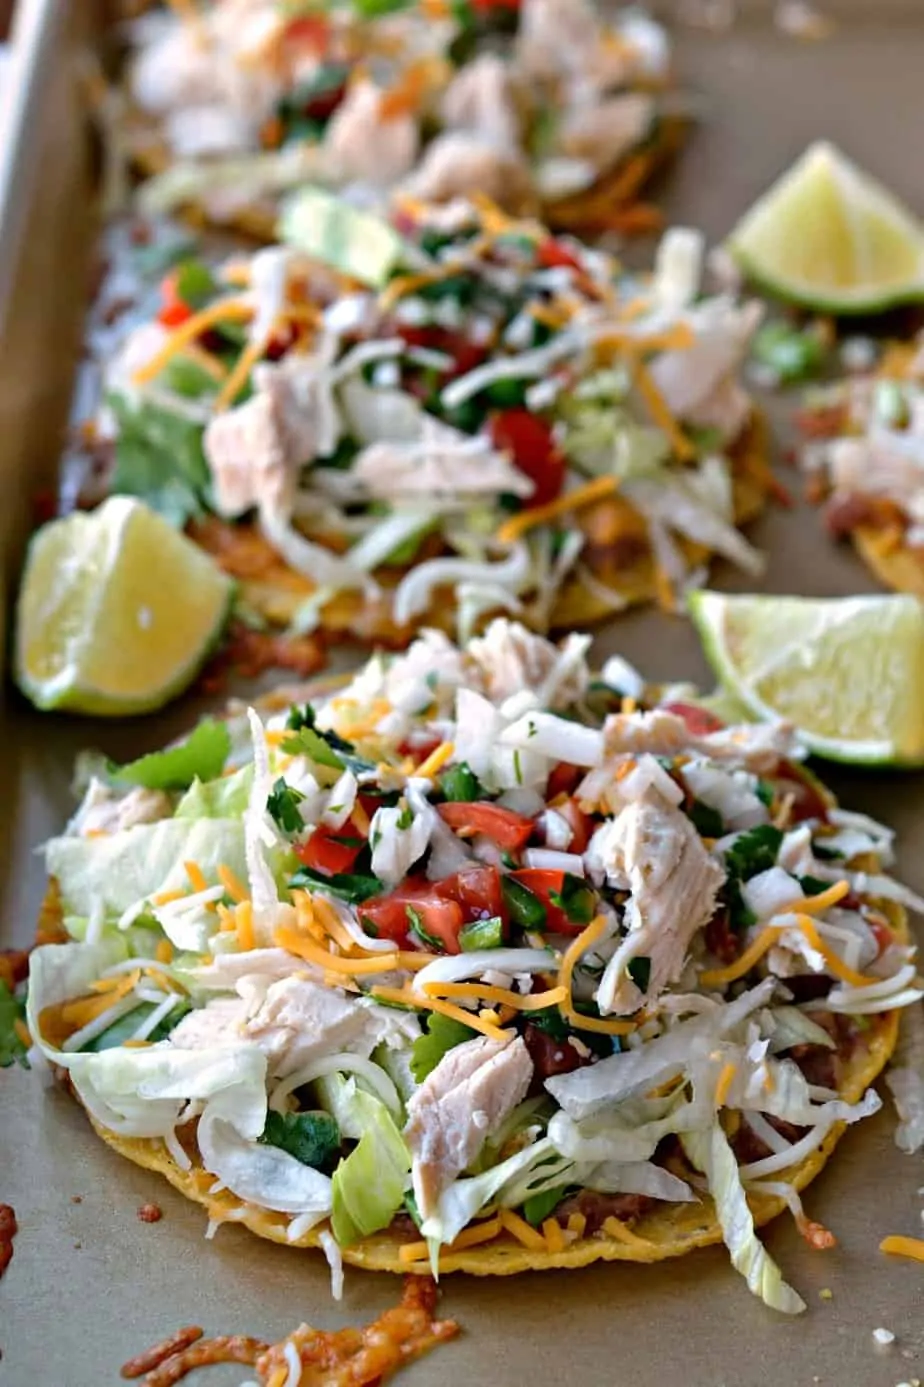 These easy Chicken Tostadas are a cinch to put together using ready to go tostada shells and rotisserie chicken.